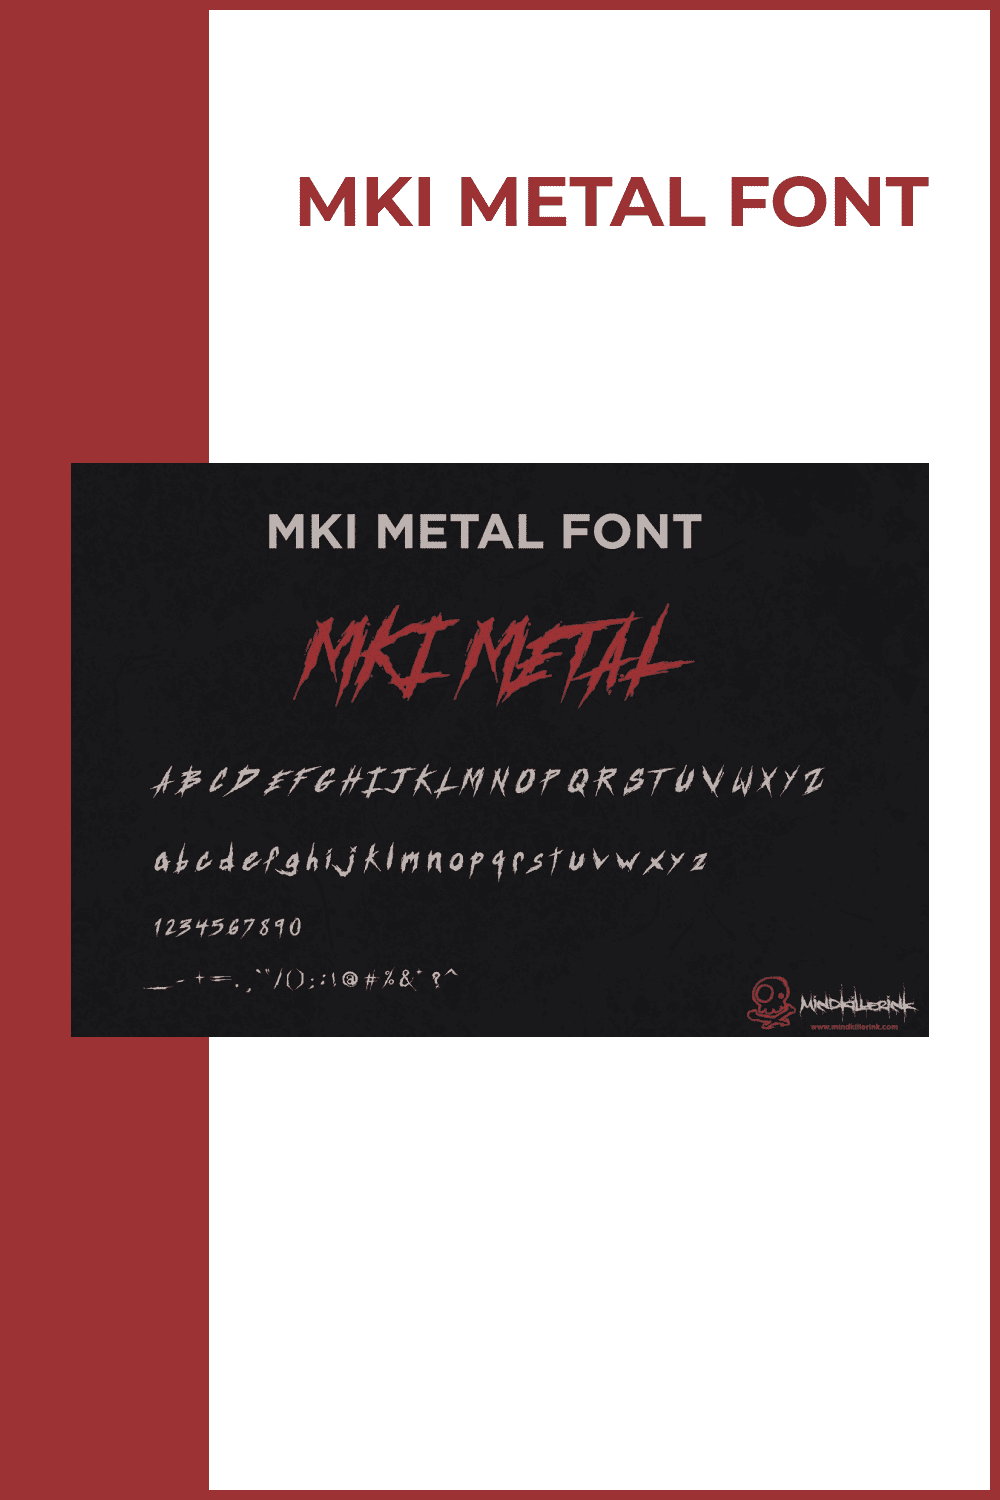 Rock style font in red.